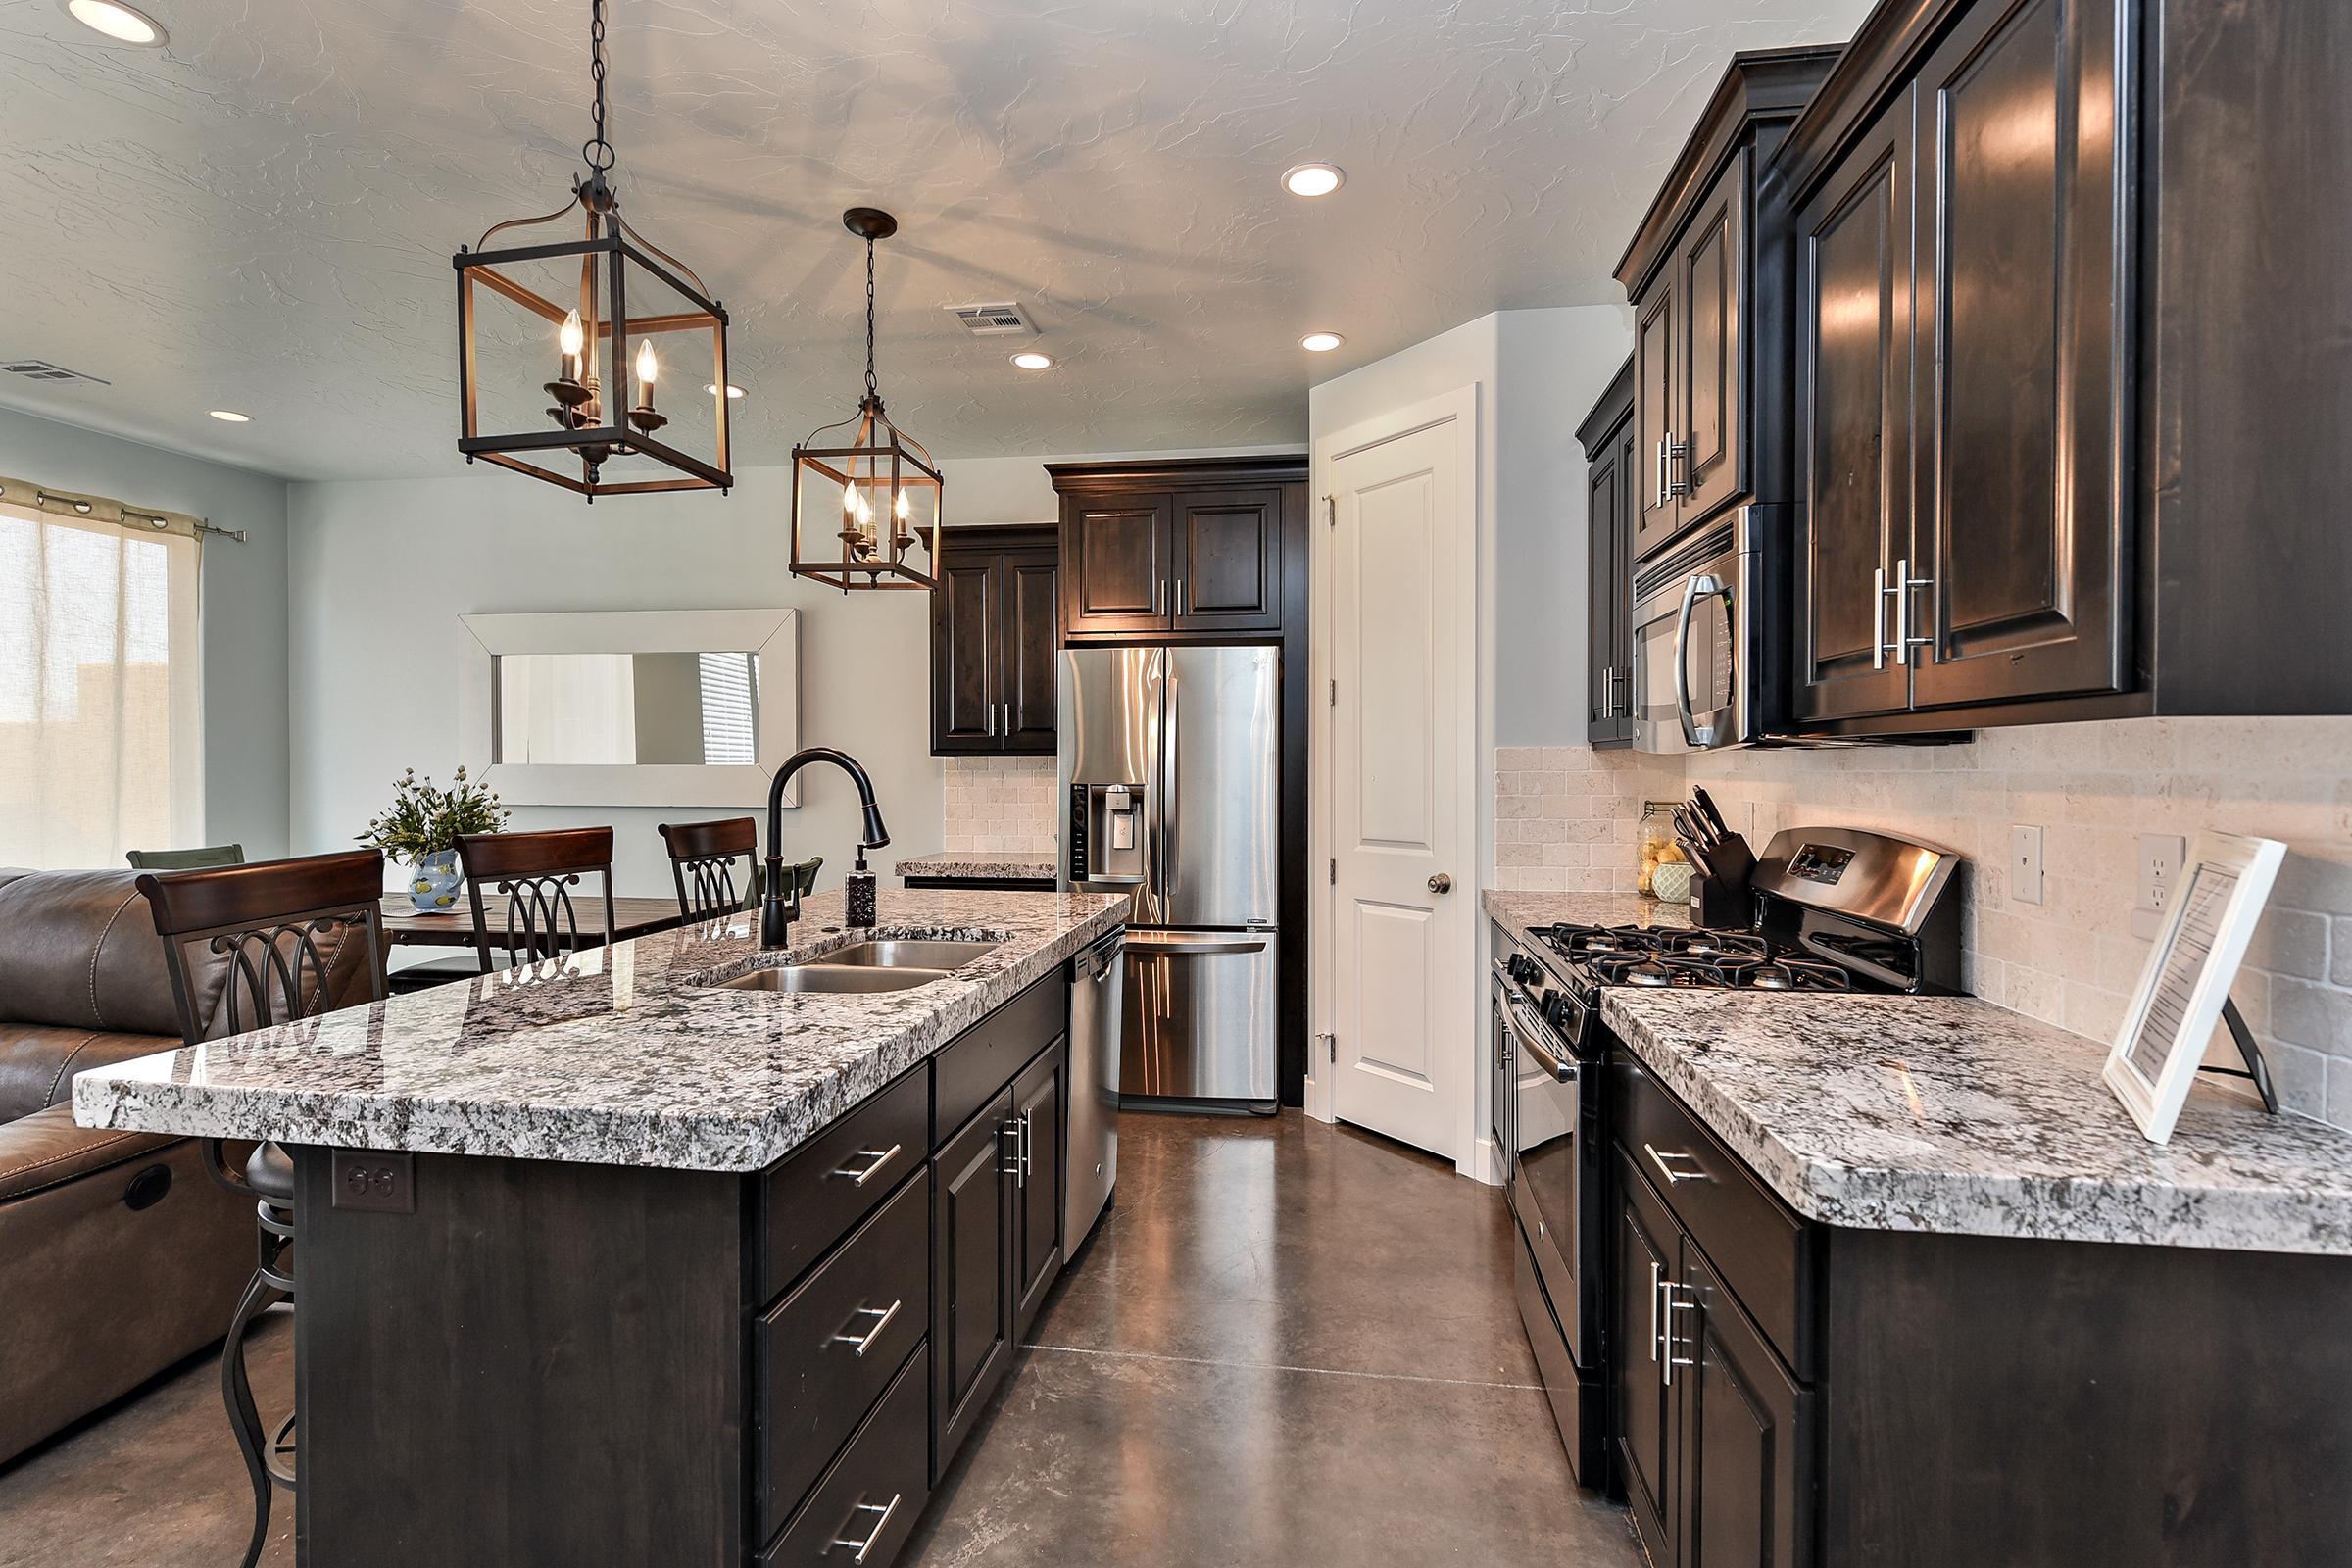 Enjoy preparing meals on our spacious stove and granite counter tops. 